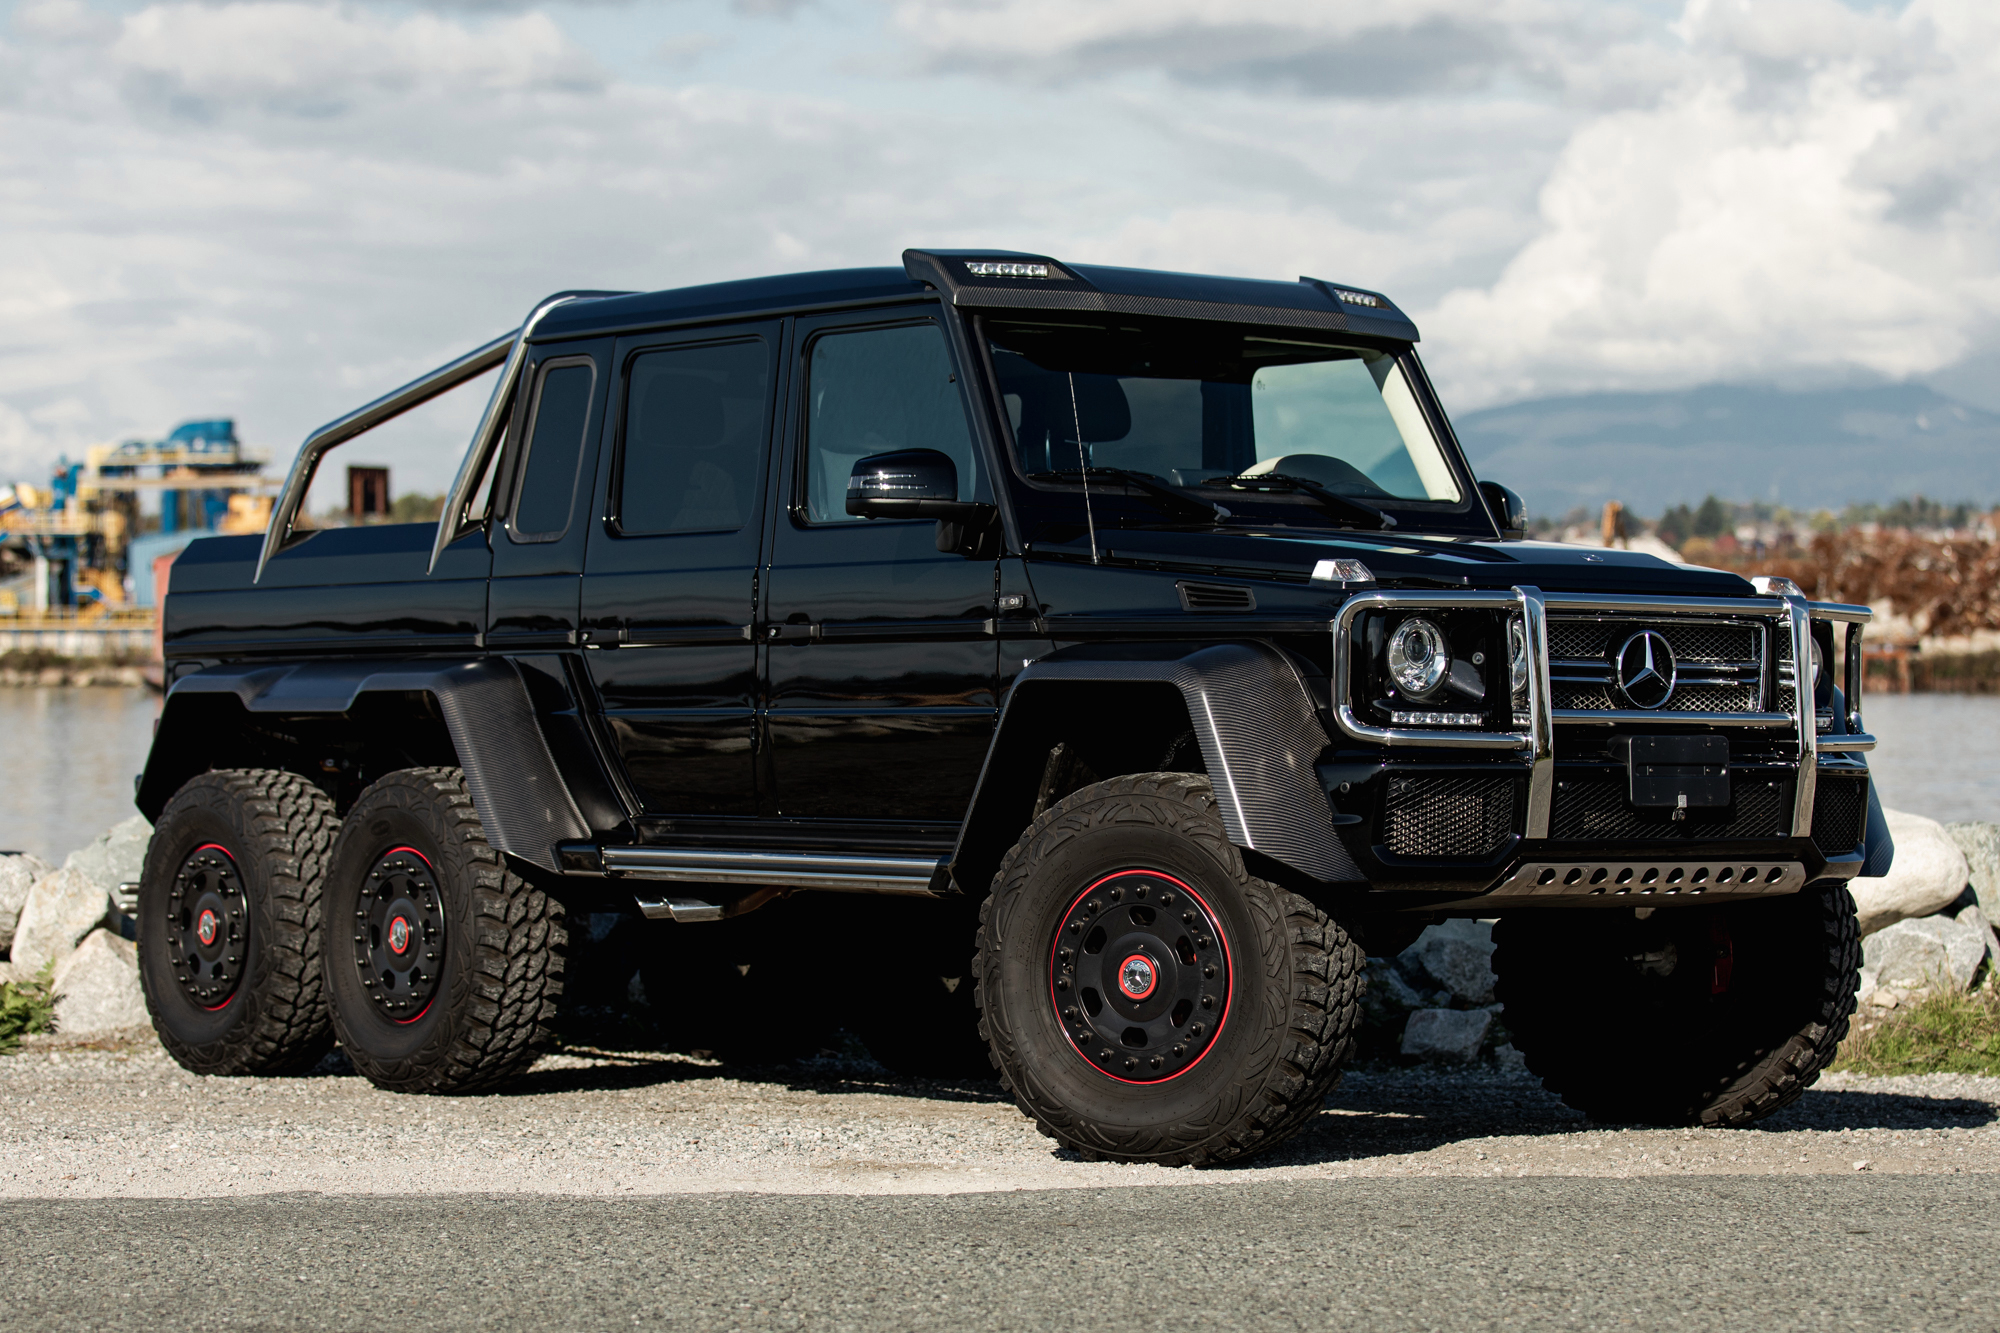 You Can Enjoy This MercedesBenz G63 AMG 6x6 But Only For 2.5K Miles